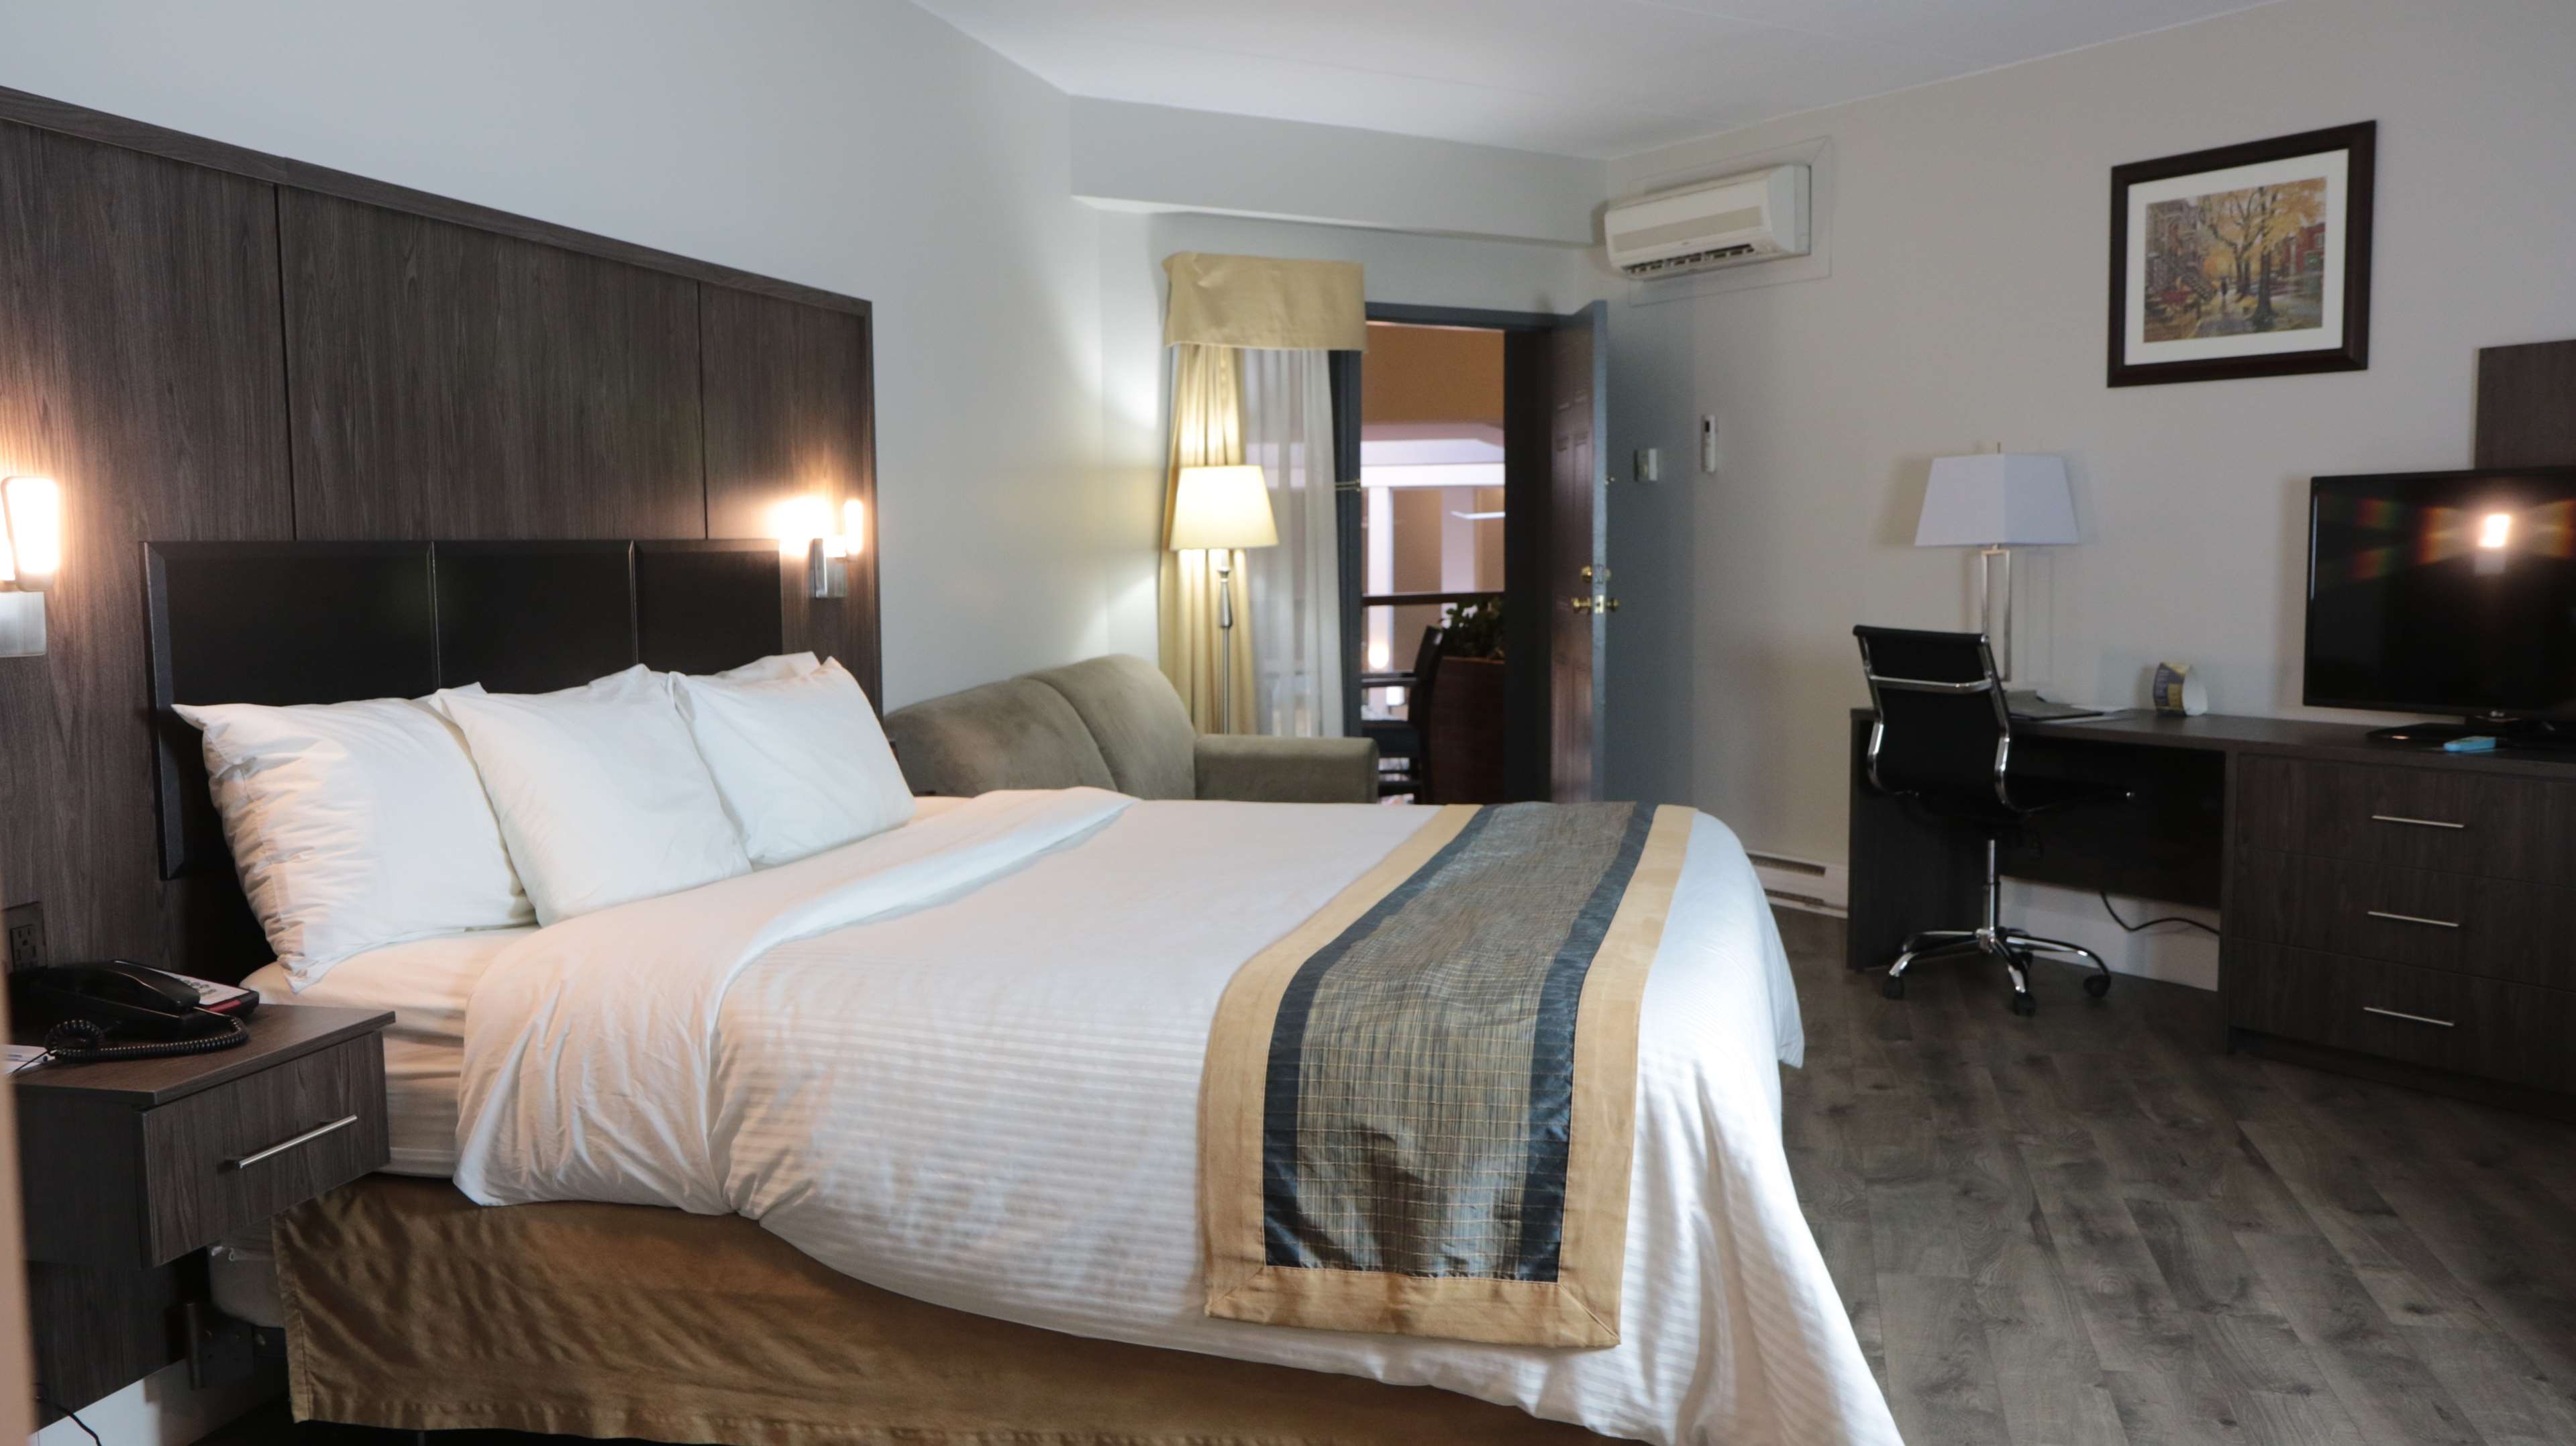 Executive Suite King Best Western Laval-Montreal Laval (450)681-9000